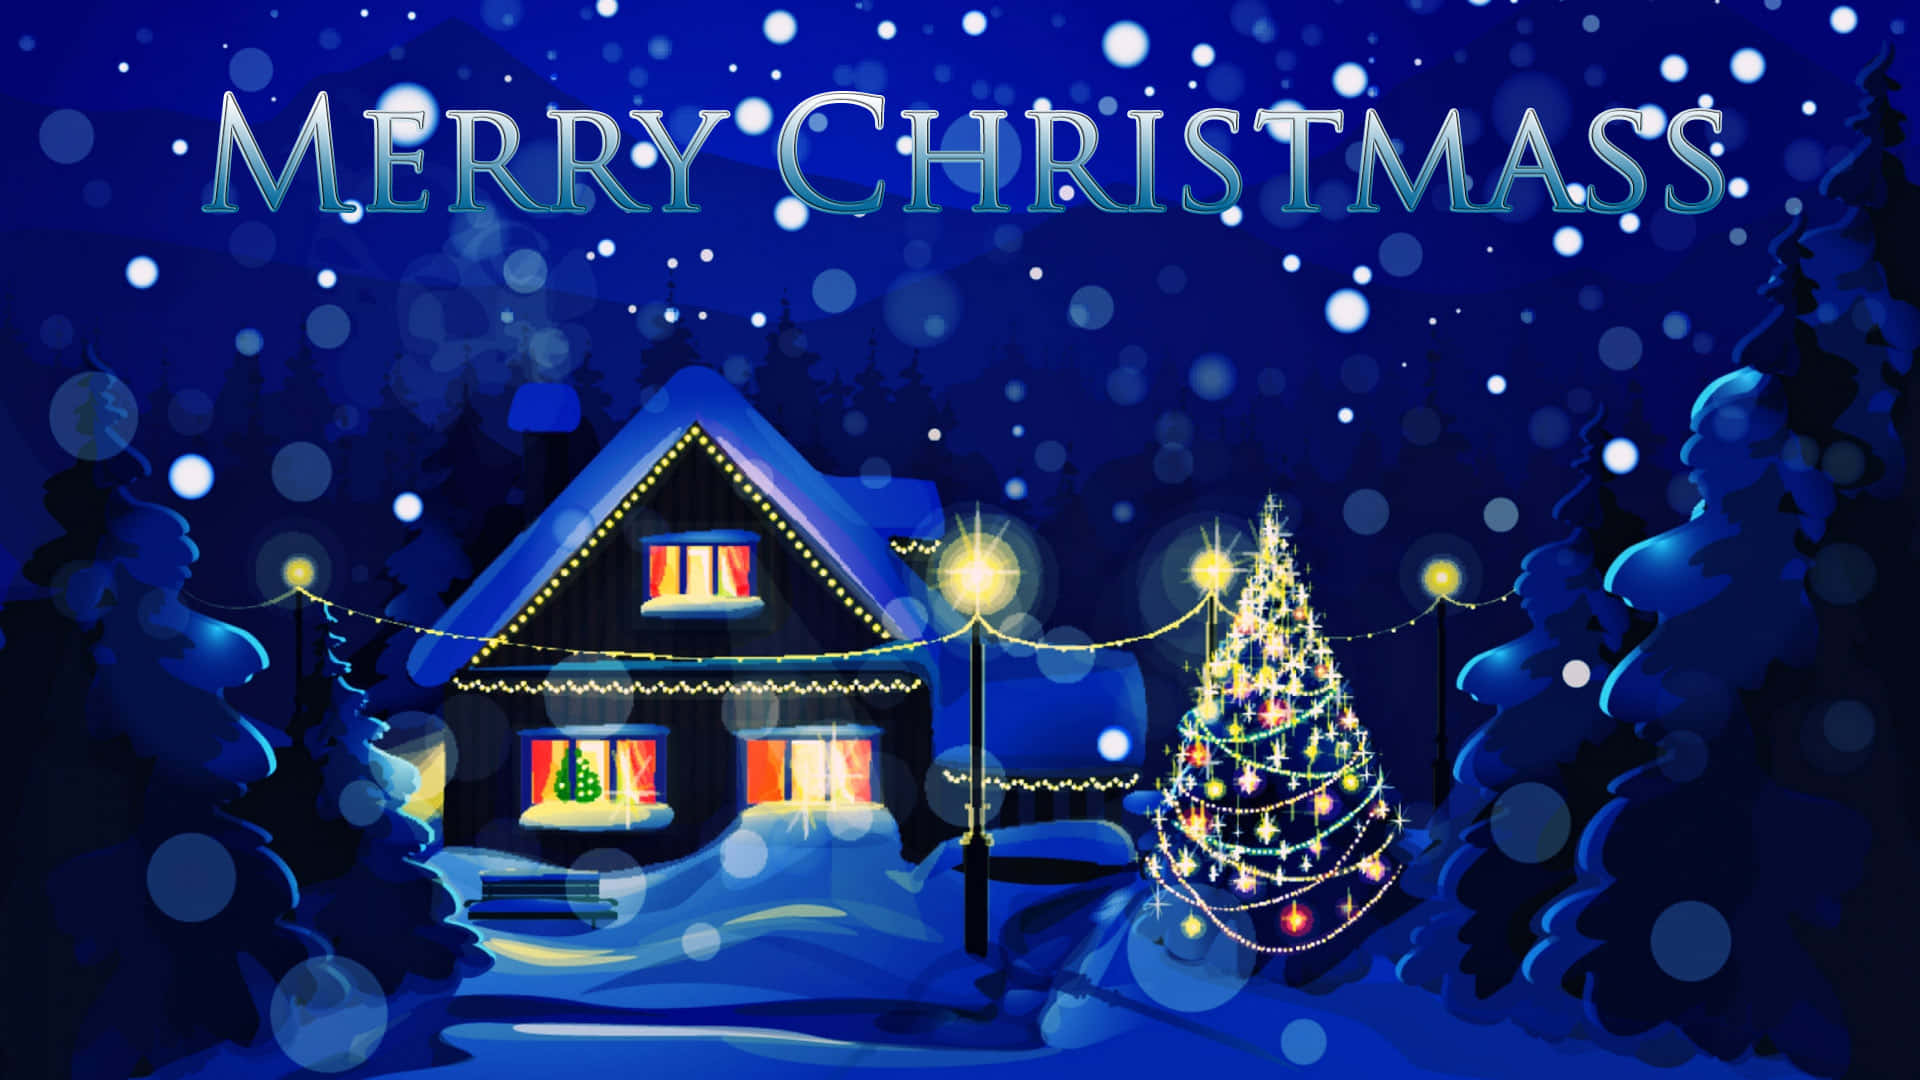 3D Christmas Scene with a Christmas Tree and Village Wallpaper